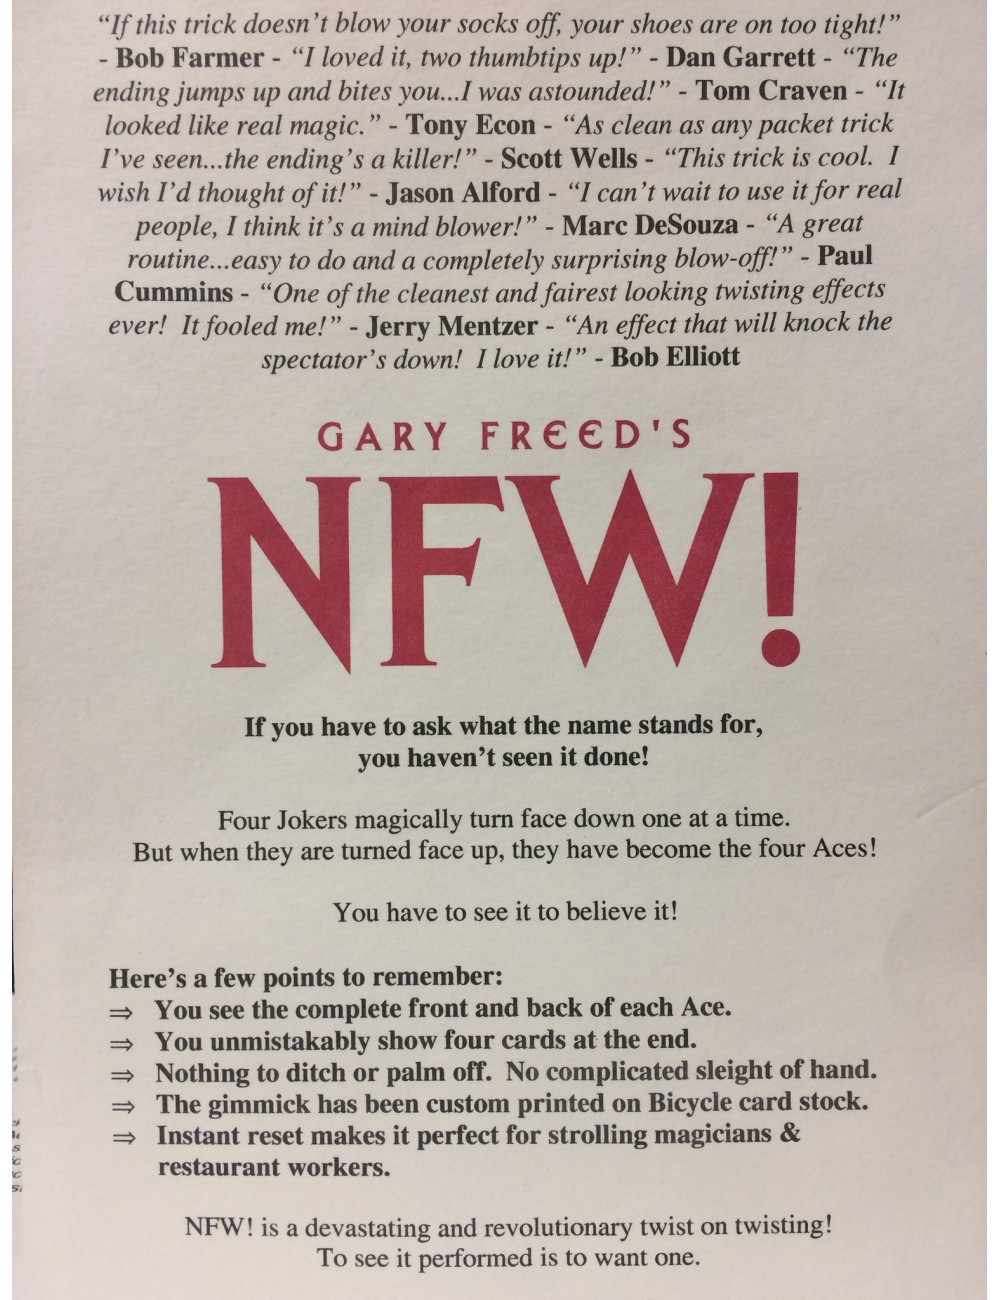 NFW! (Gary Freed)